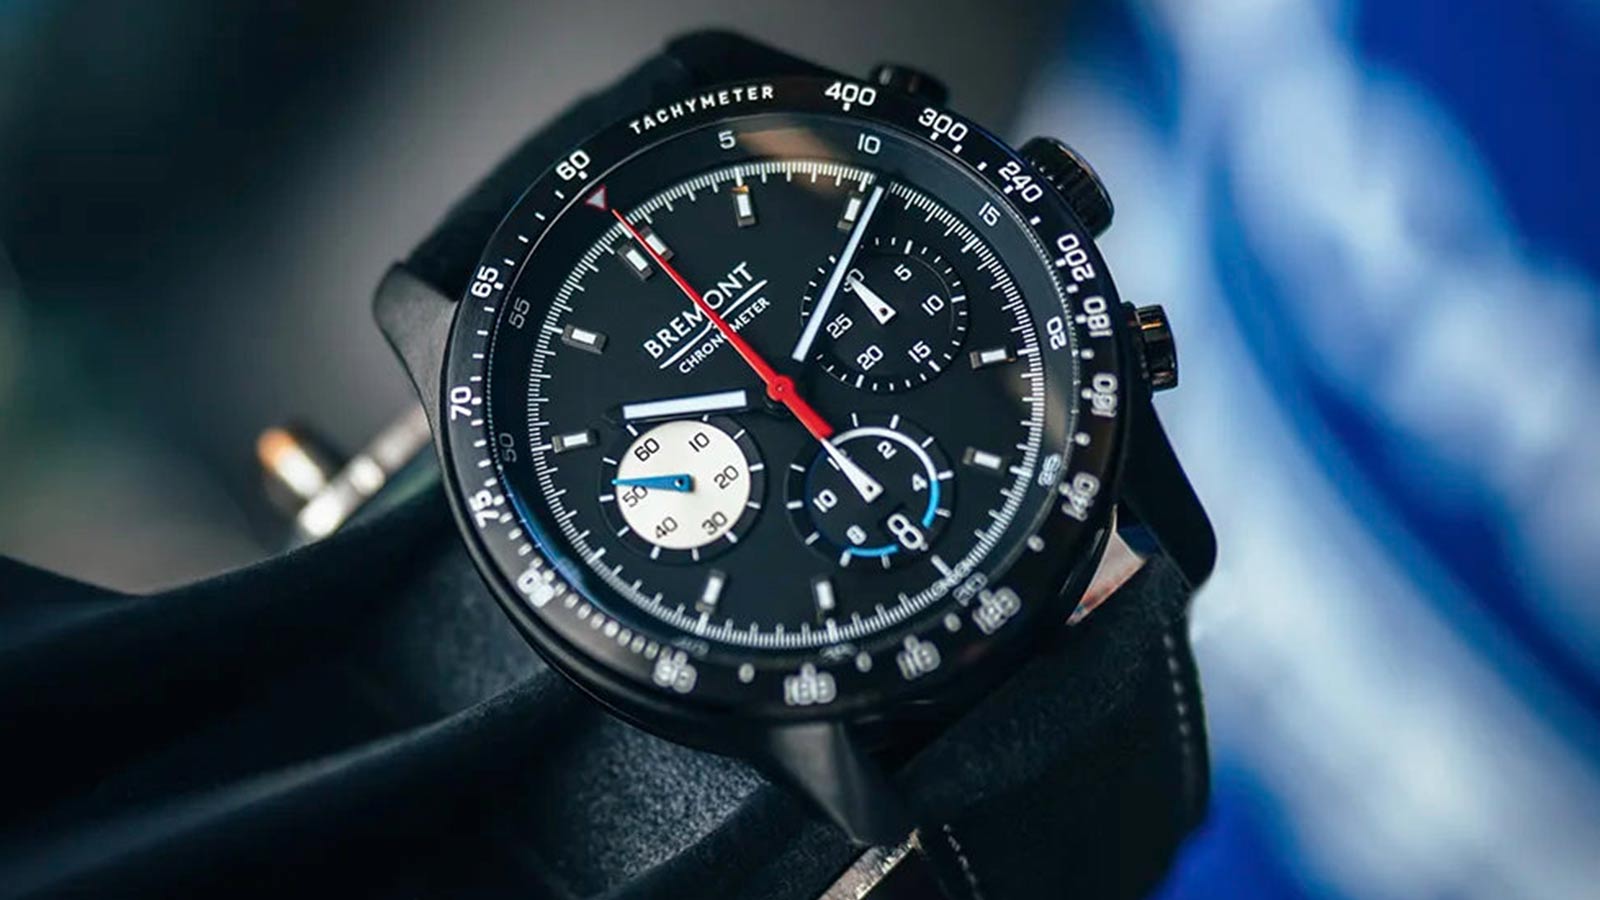 THE BREMONT WR-45